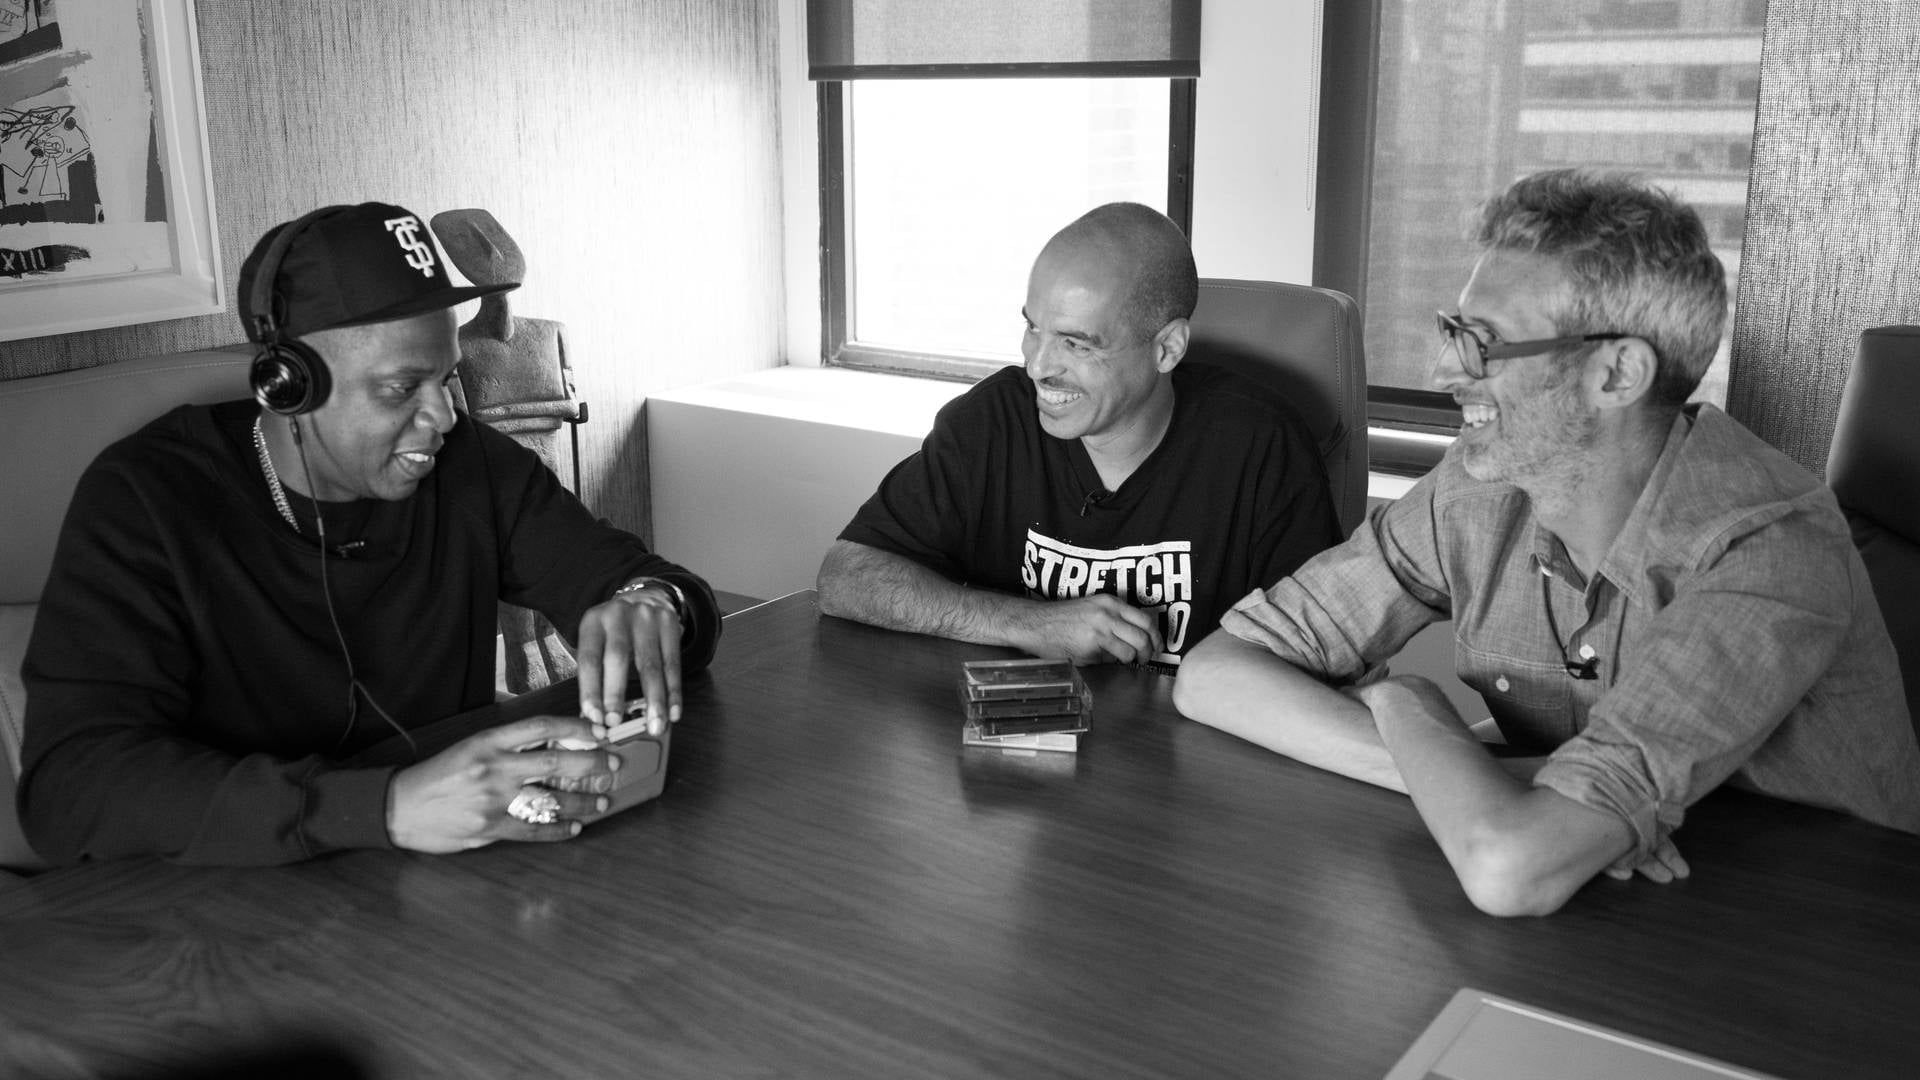 Stretch and Bobbito: Radio That Changed Lives background